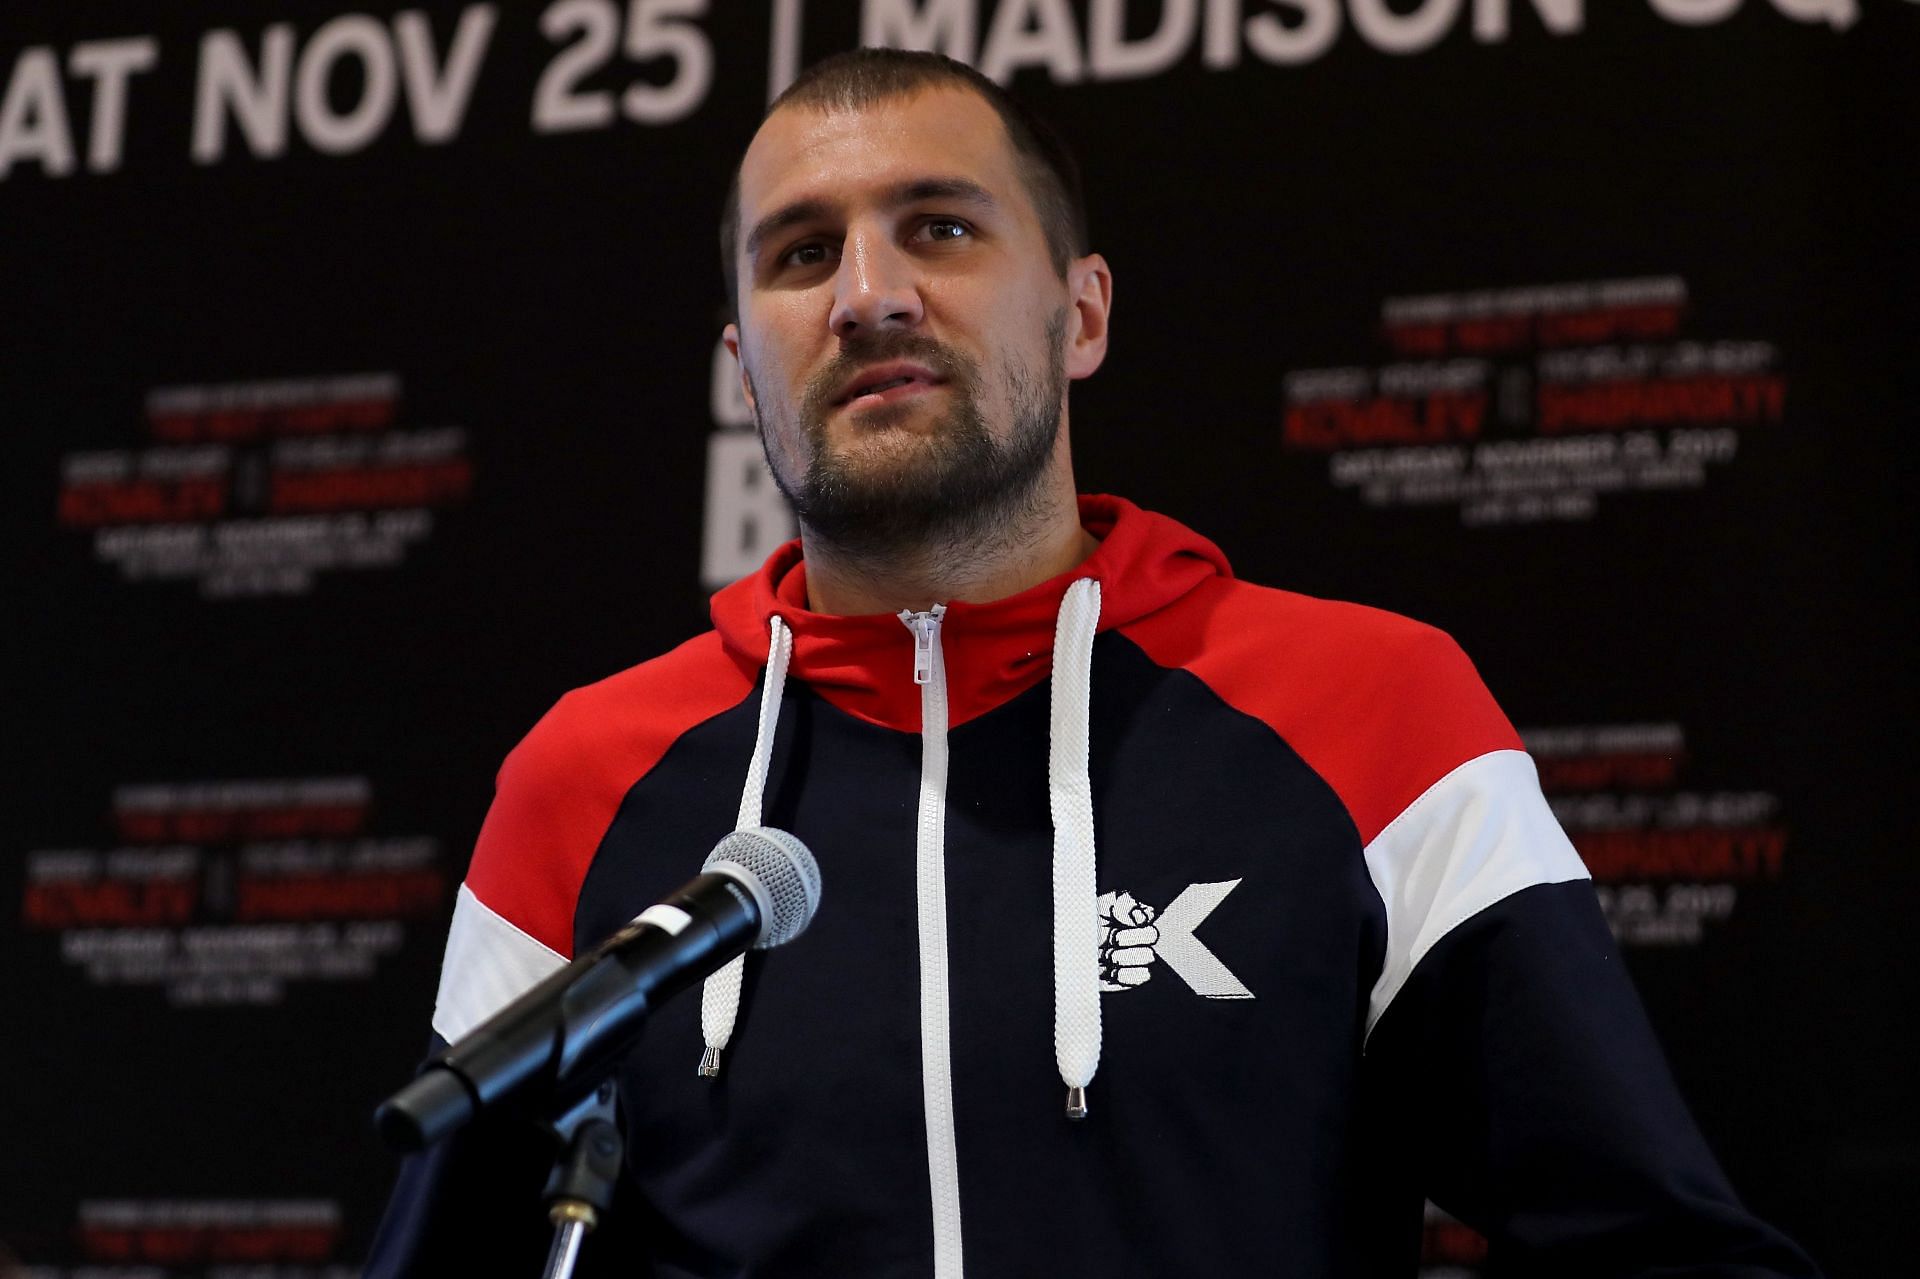 Sergey Kovaelv has revealed what it was like to prepare for a return to the ring.